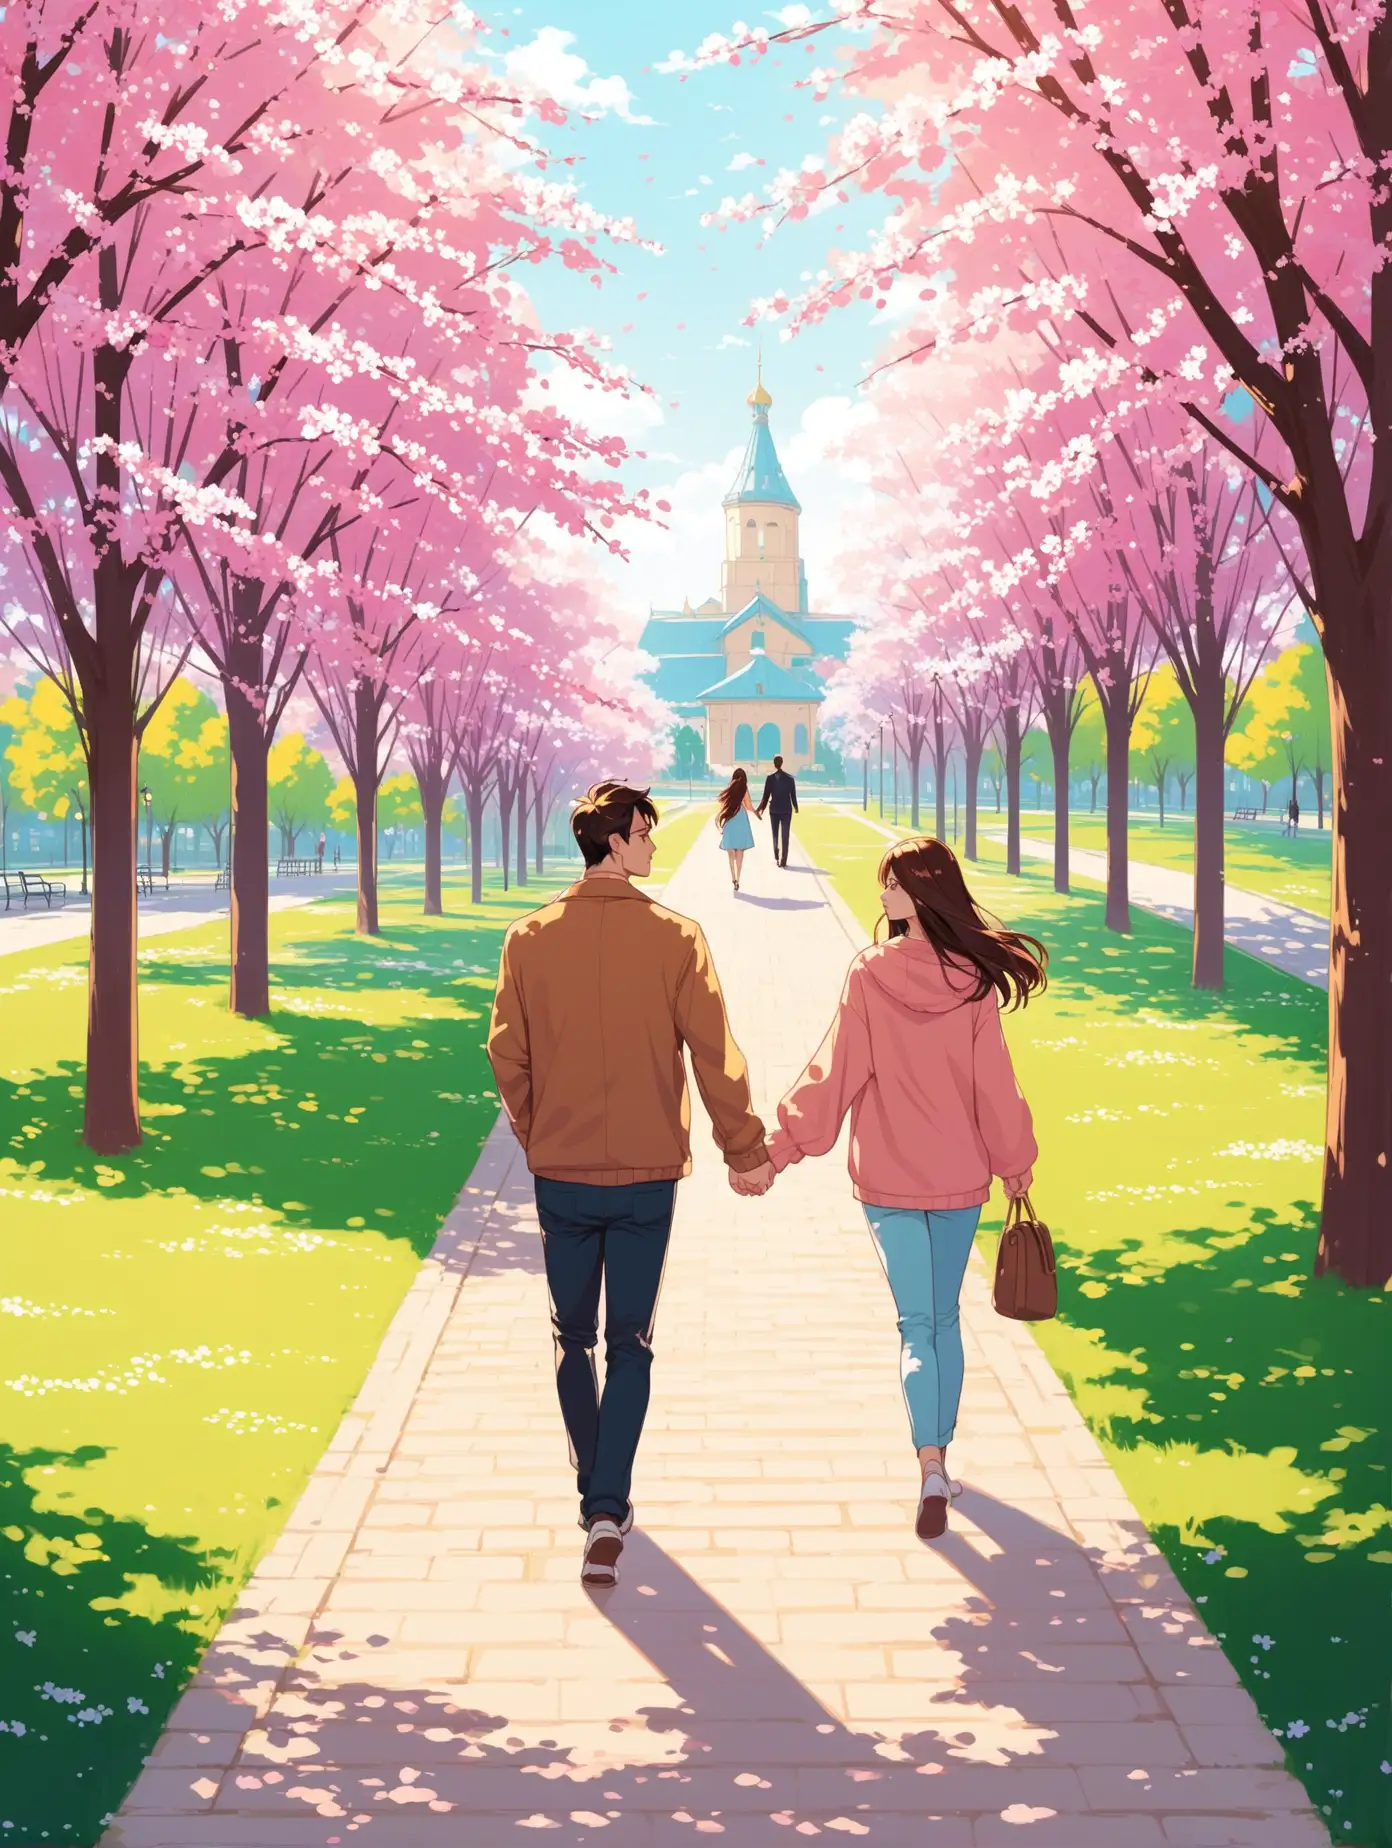 Couple Strolling Through Blossoming Urban Park in Spring